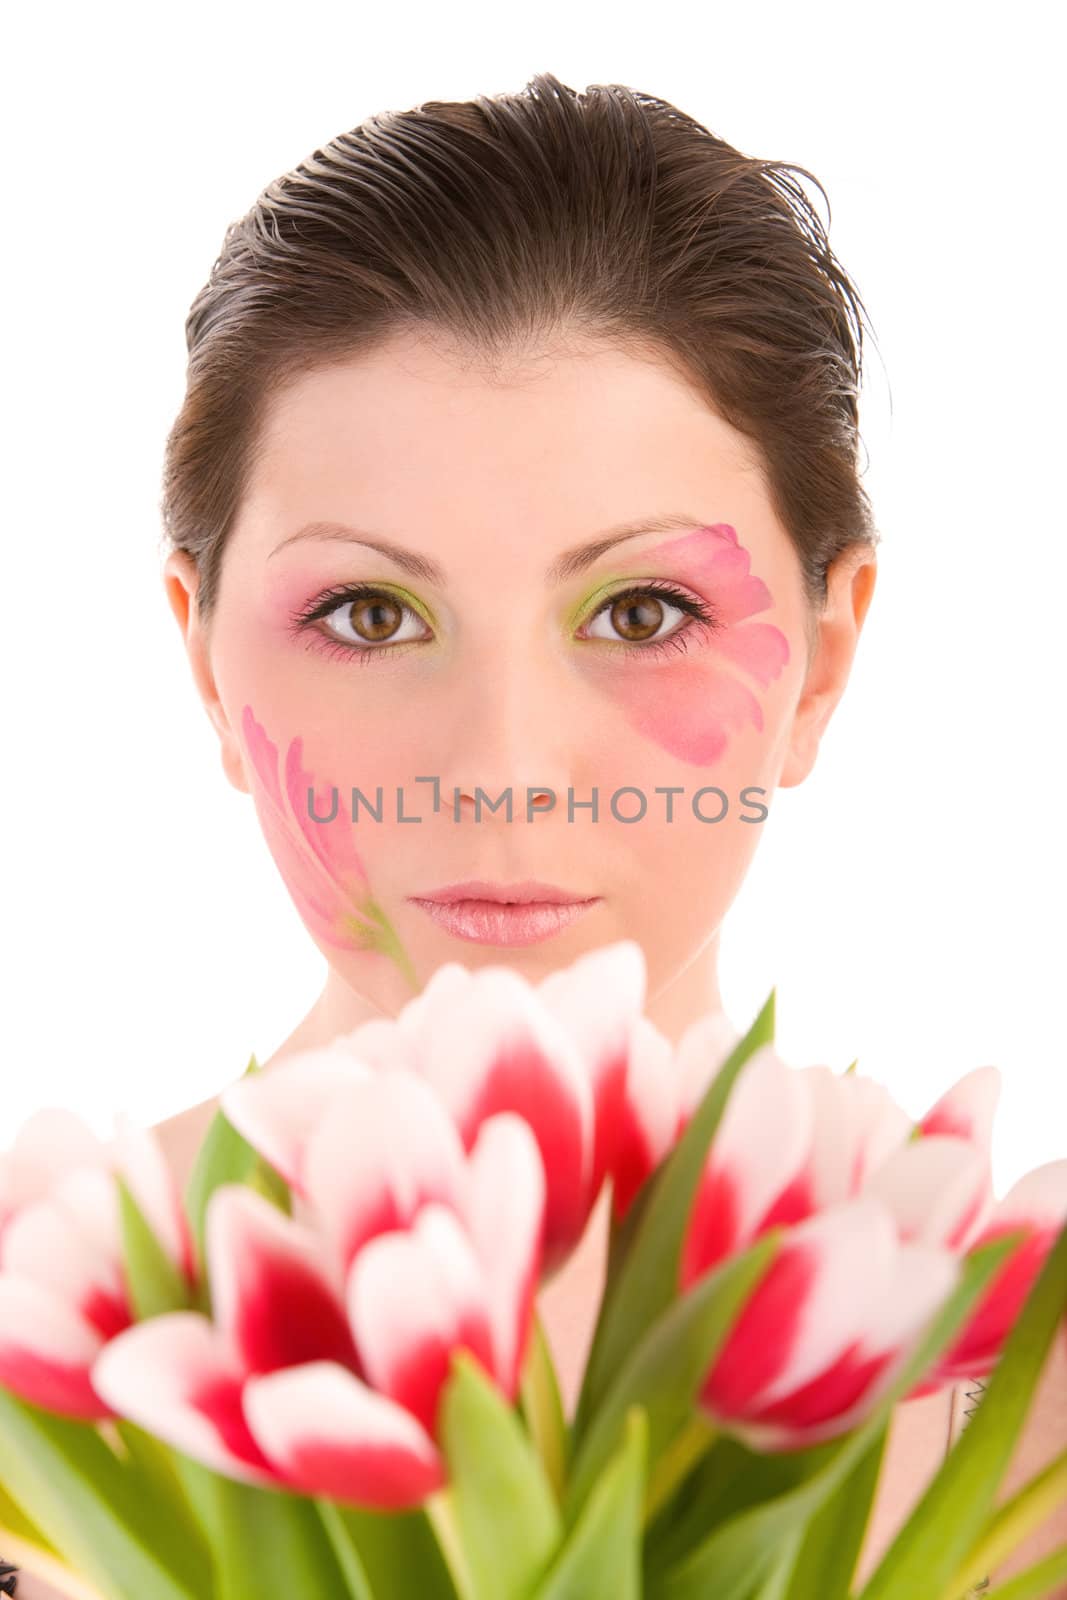 Woman head and tulips by mihhailov